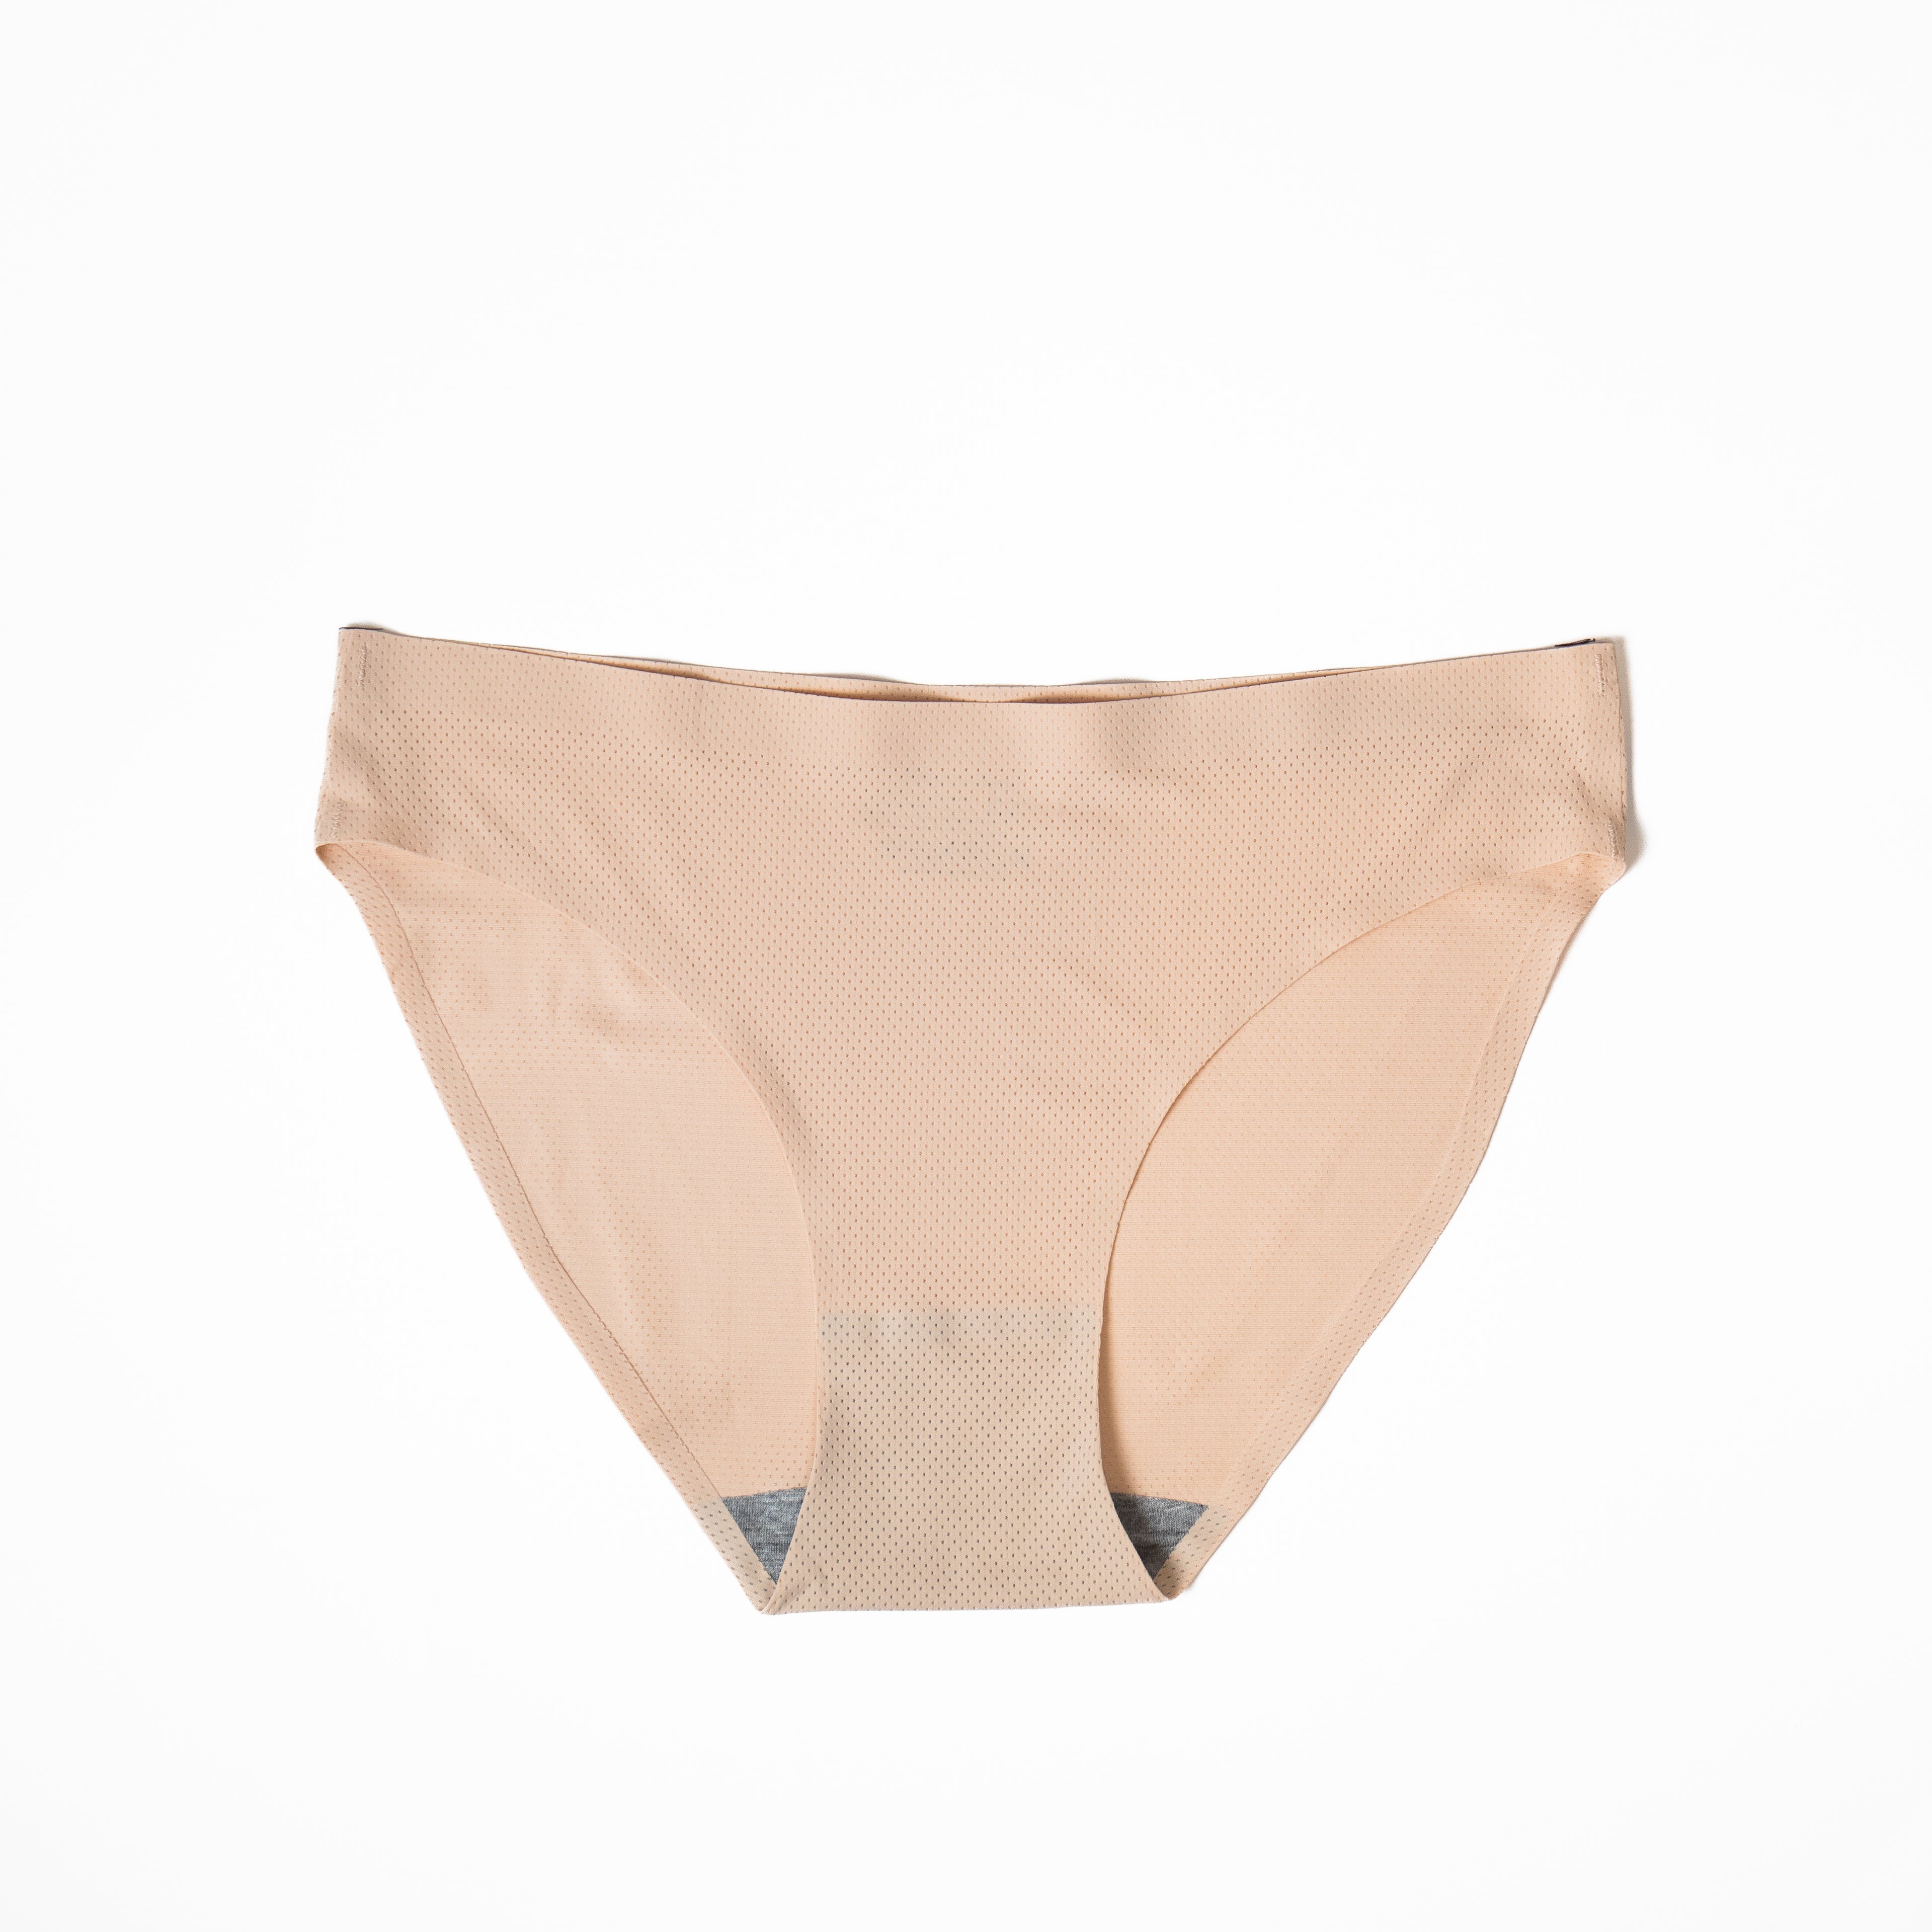 Get More Comfort with Our Hipster Panty - Wacoal Philippines